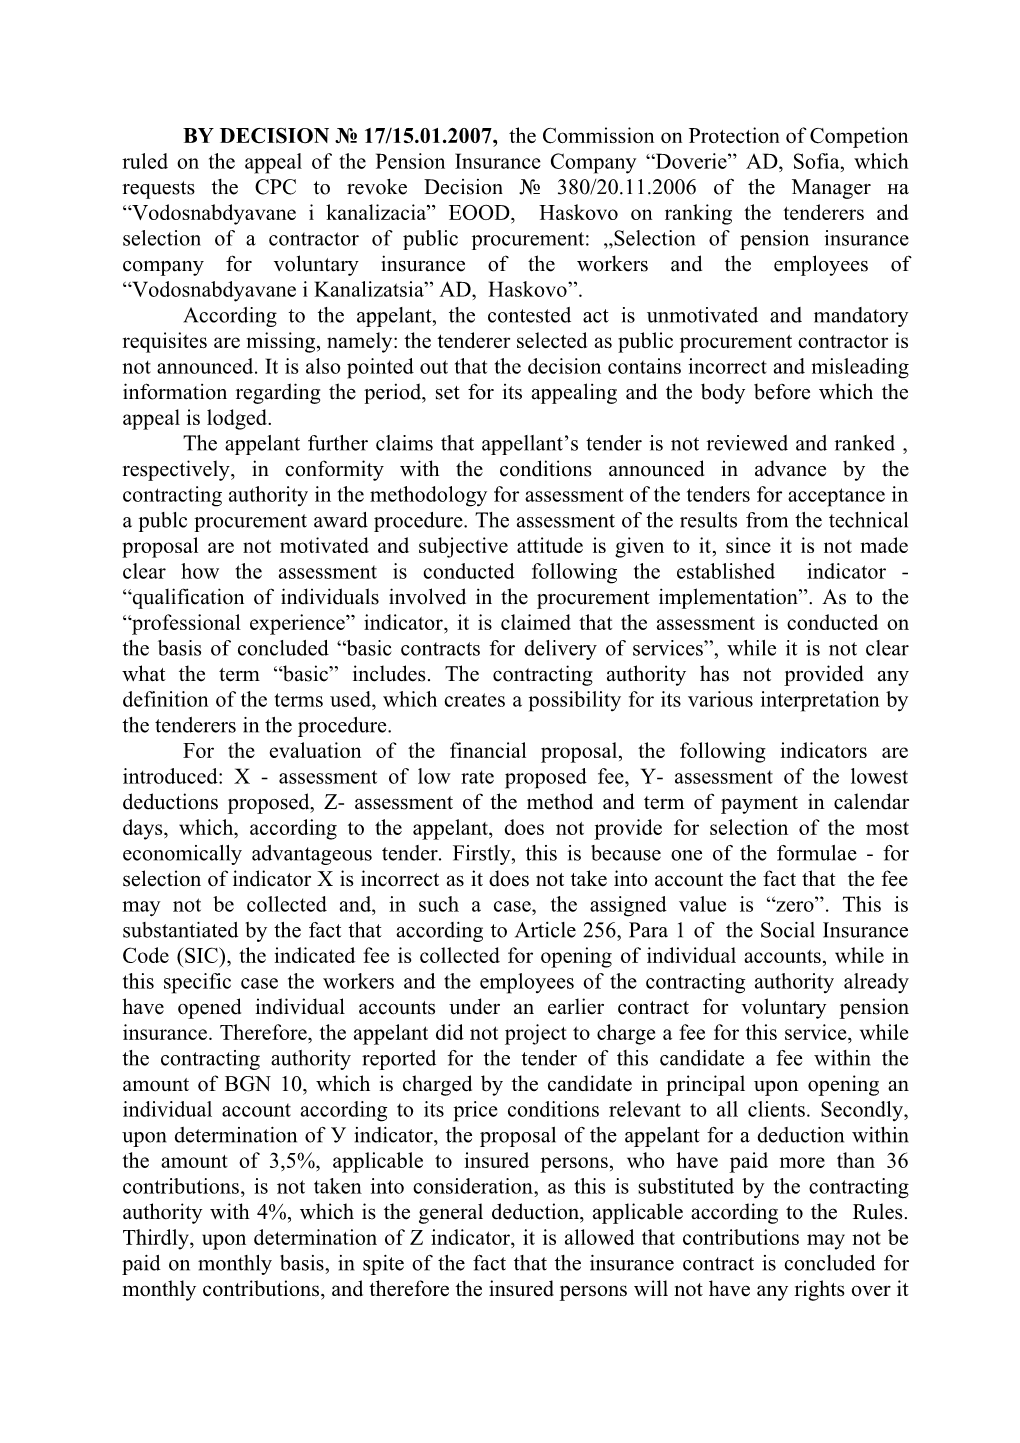 BY DECISION 17/15.01.2007, the Commission on Protection of Competion Ruled on the Appeal